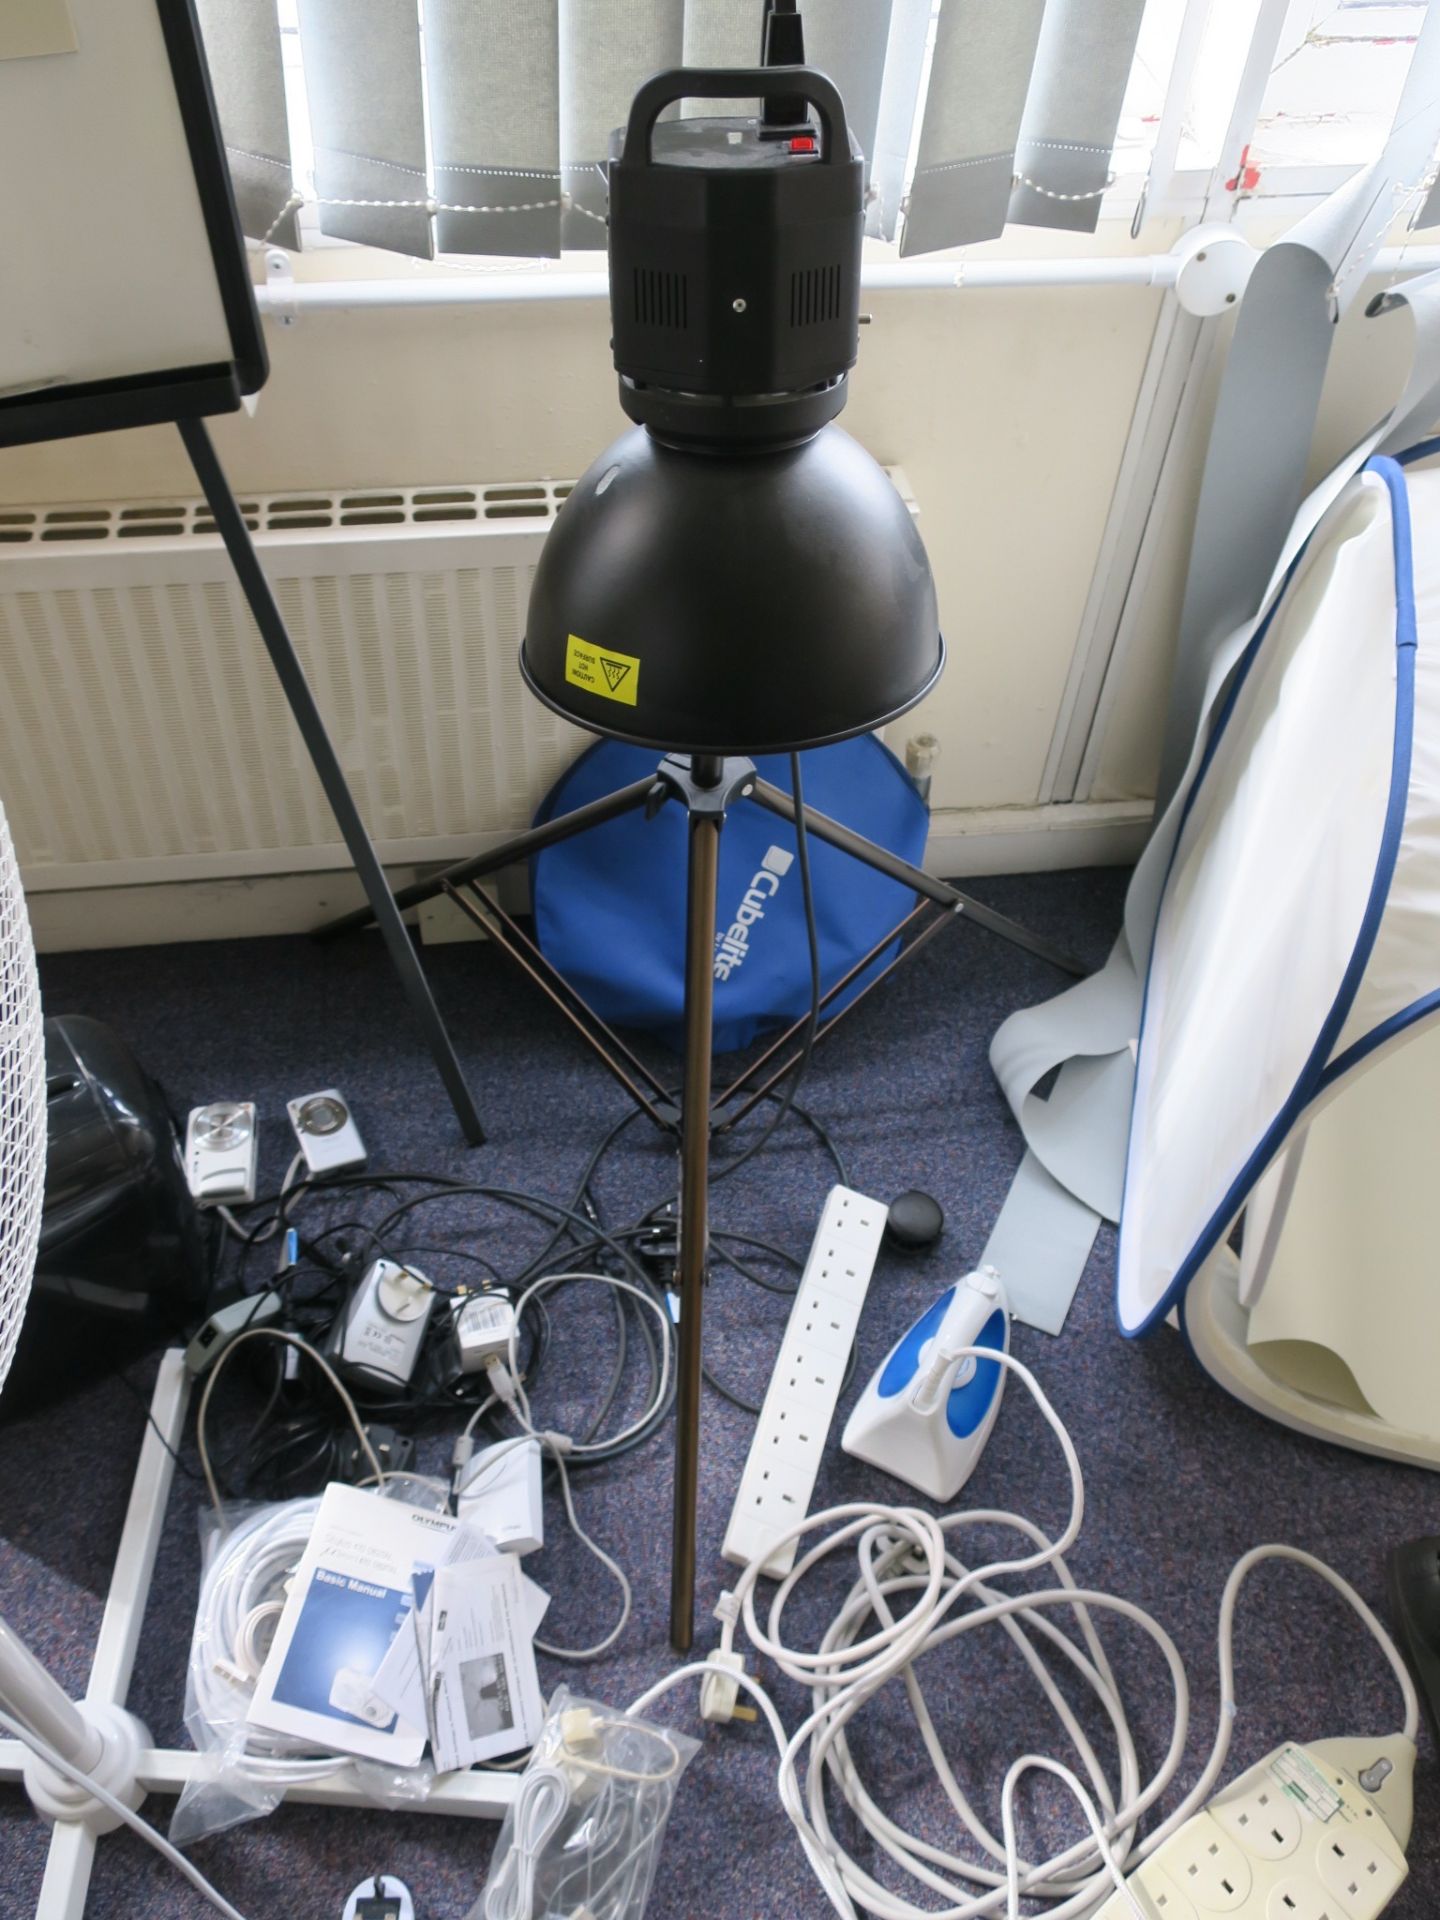 * Professional Photography Light, Shredder, Fan, Extension Cables, Christmas Decorations, - Image 4 of 5